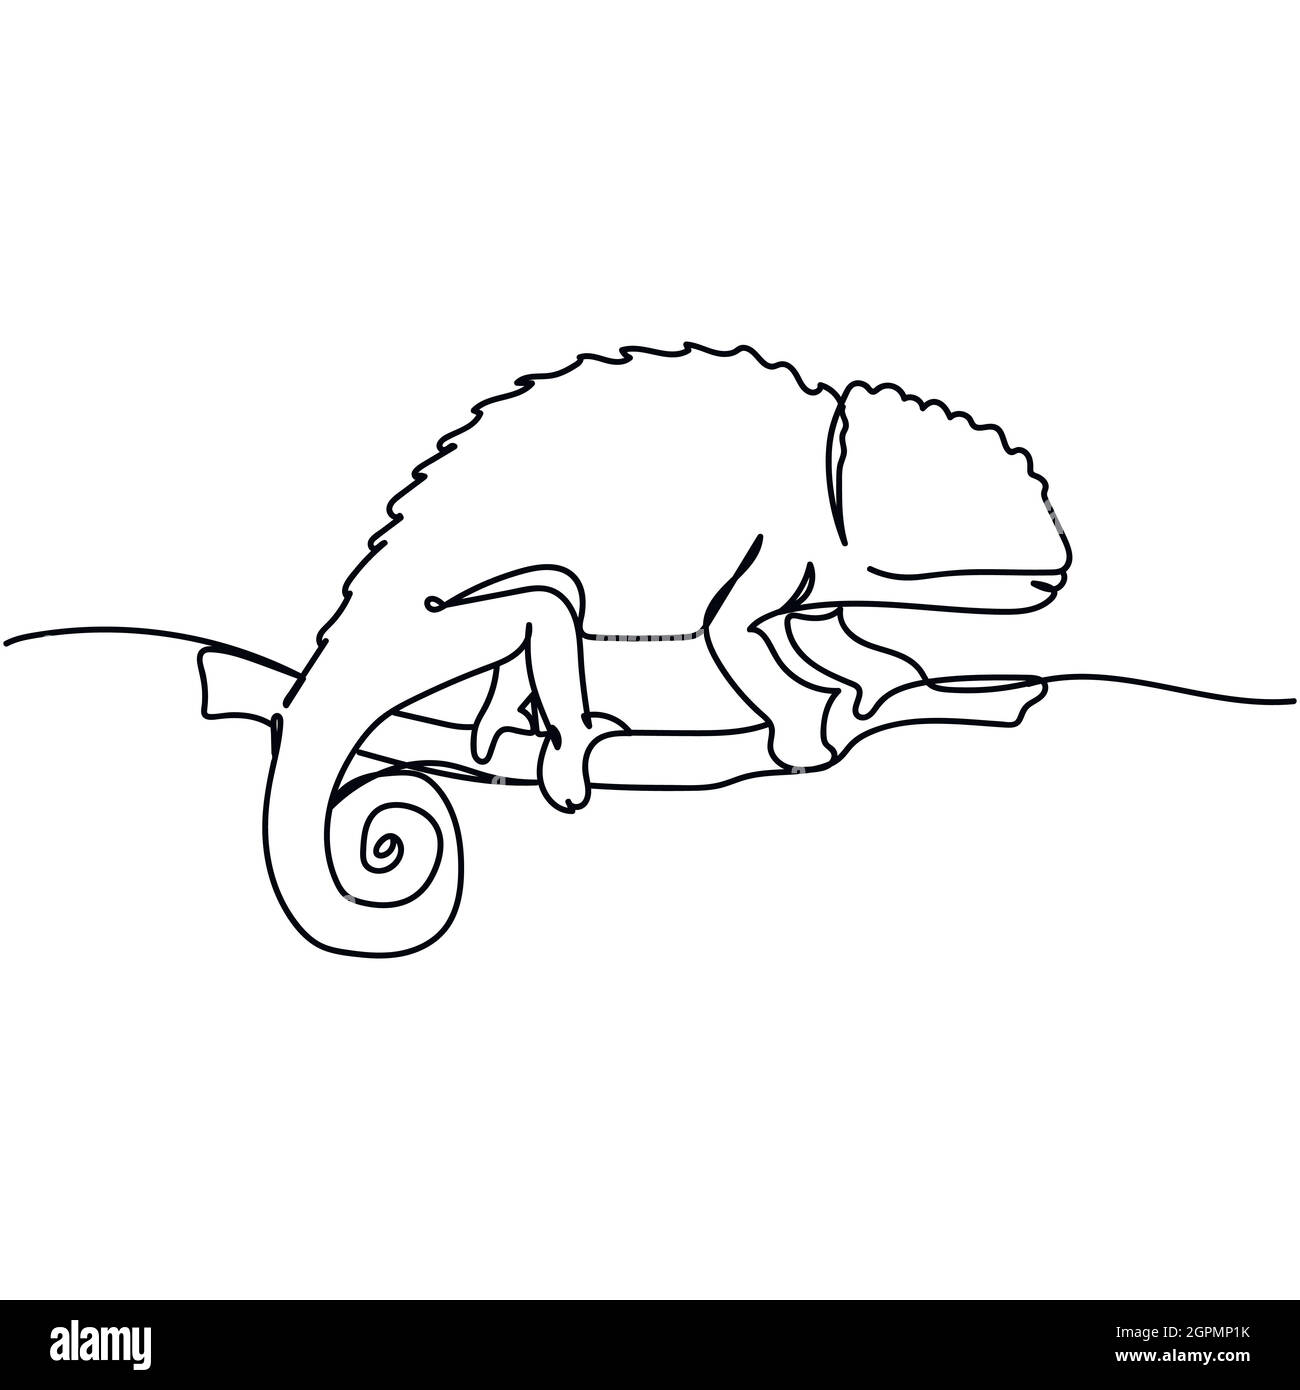 Continuous one line of chameleon lizard and businessman in silhouette. Minimal style. Perfect for cards, party invitations, posters, stickers, clothing. Black abstract icon. Animal concept Stock Vector